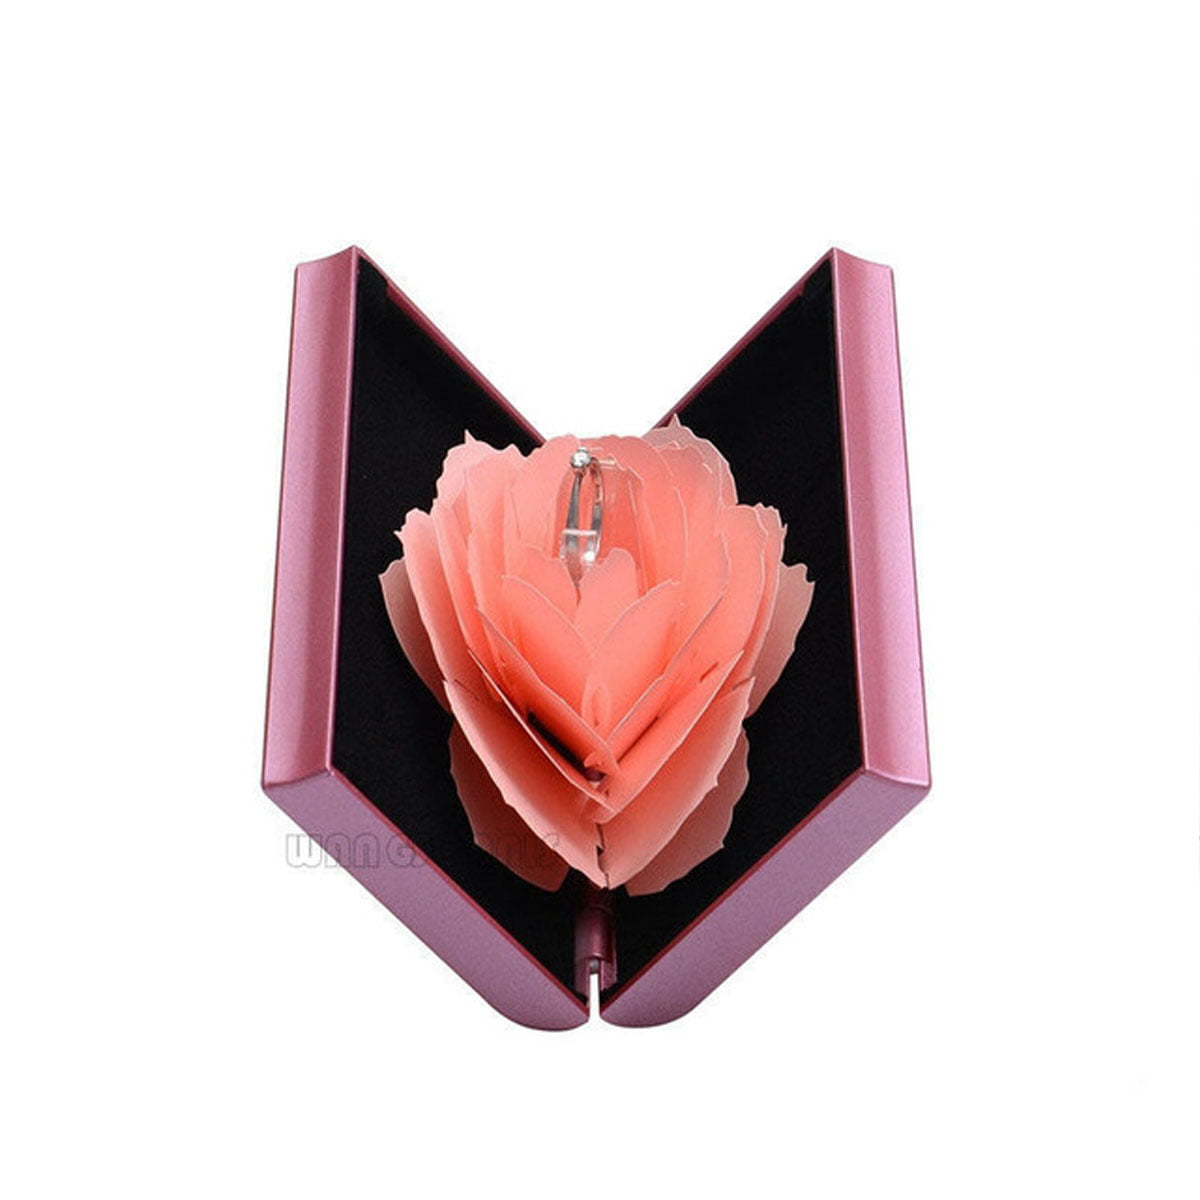 Details about   3D Up Rose Ring Box Wedding Engagement Jewelry Storage Holder Case Bump ED 